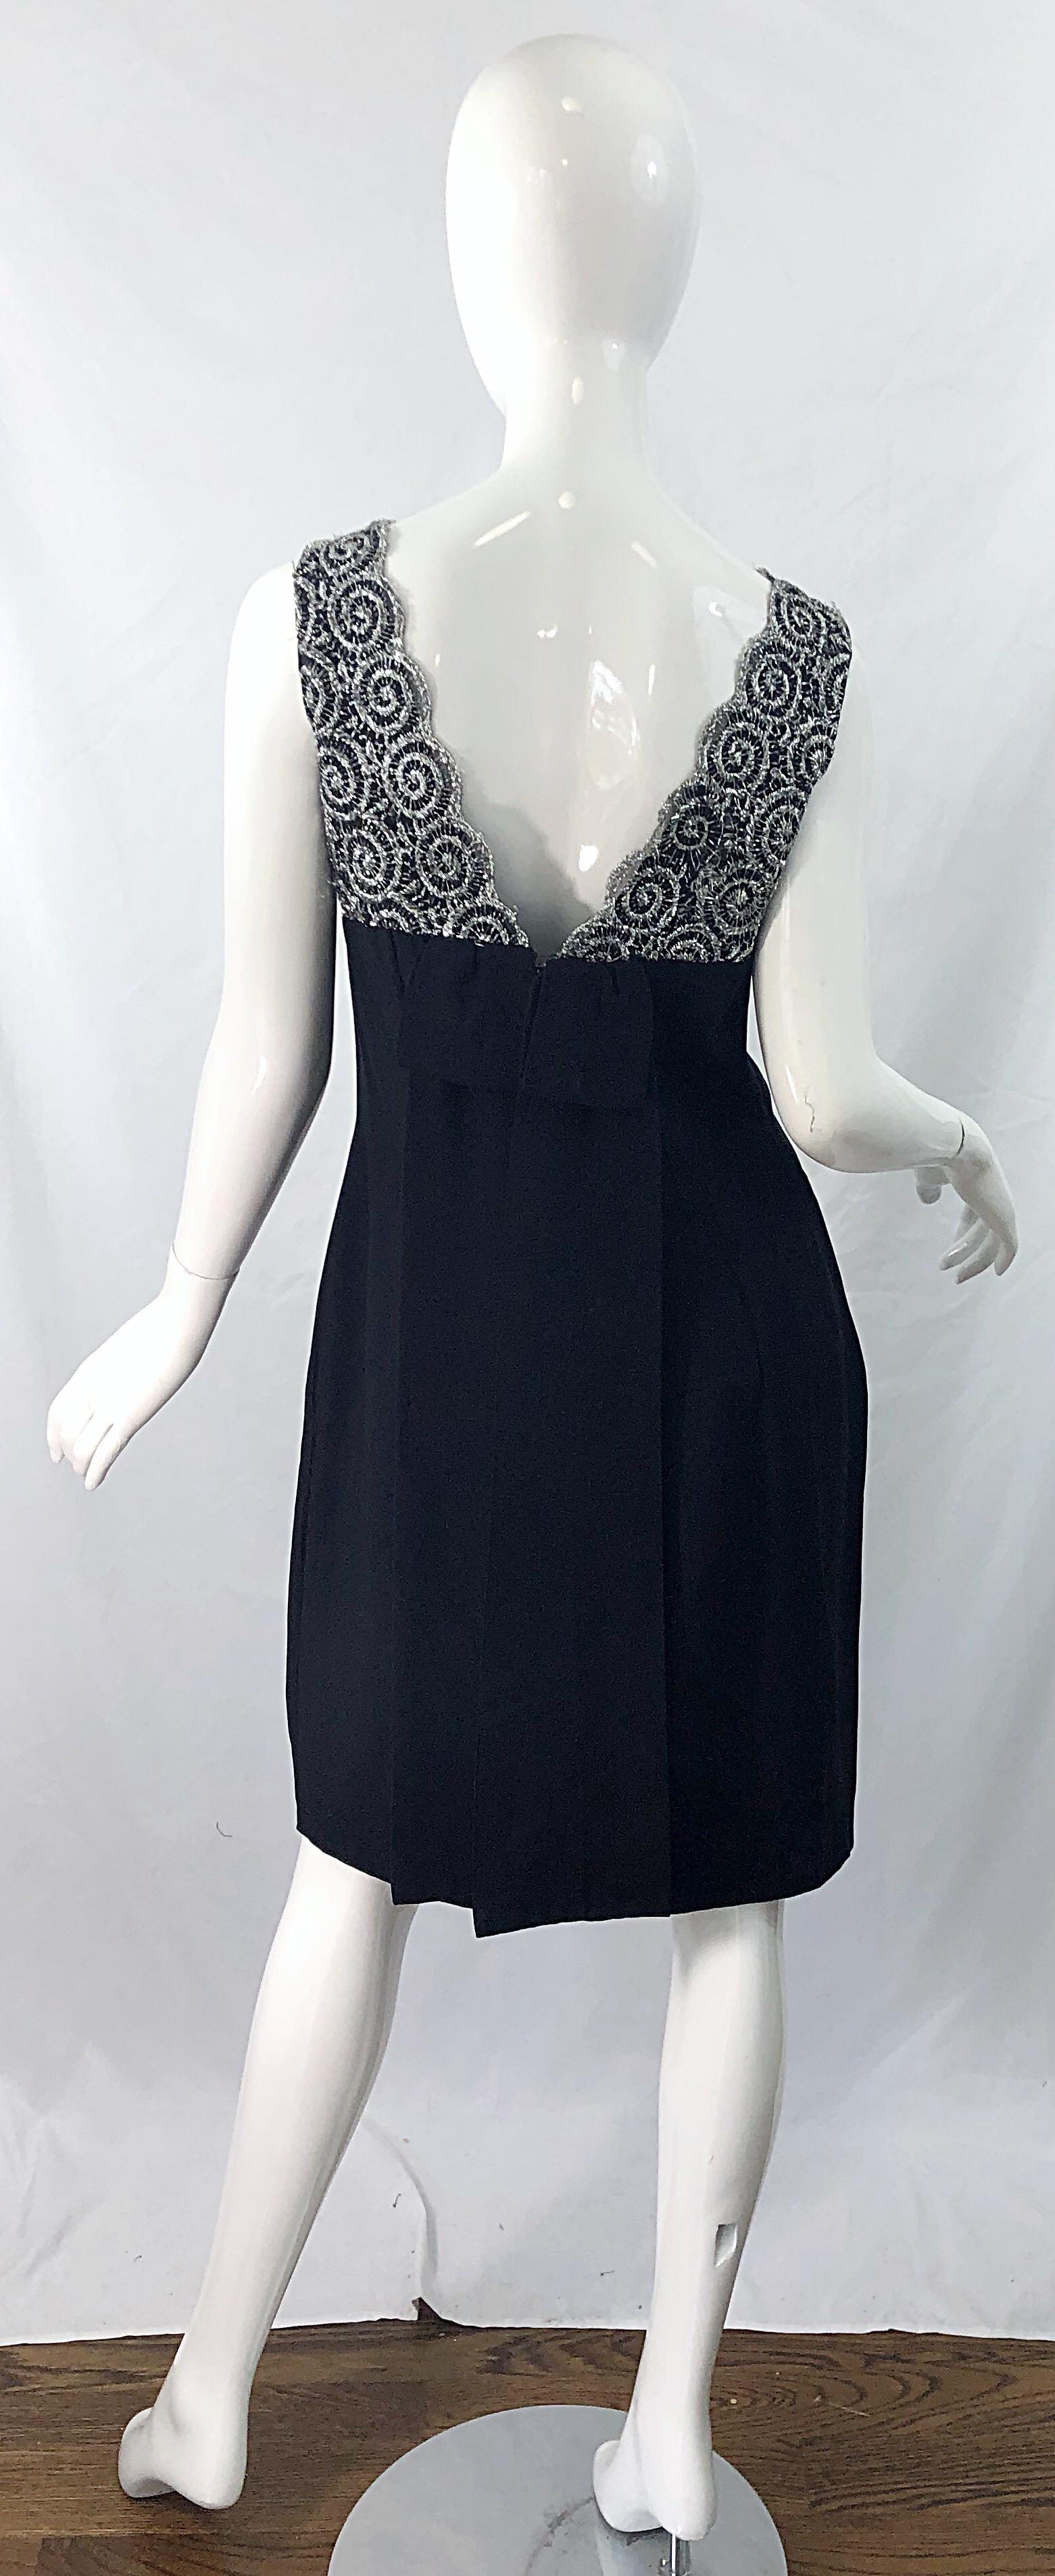 Women's Chic 1960s Black and Silver Metallic Lace Rayon Crepe Vintage 60s Sheath Dress For Sale